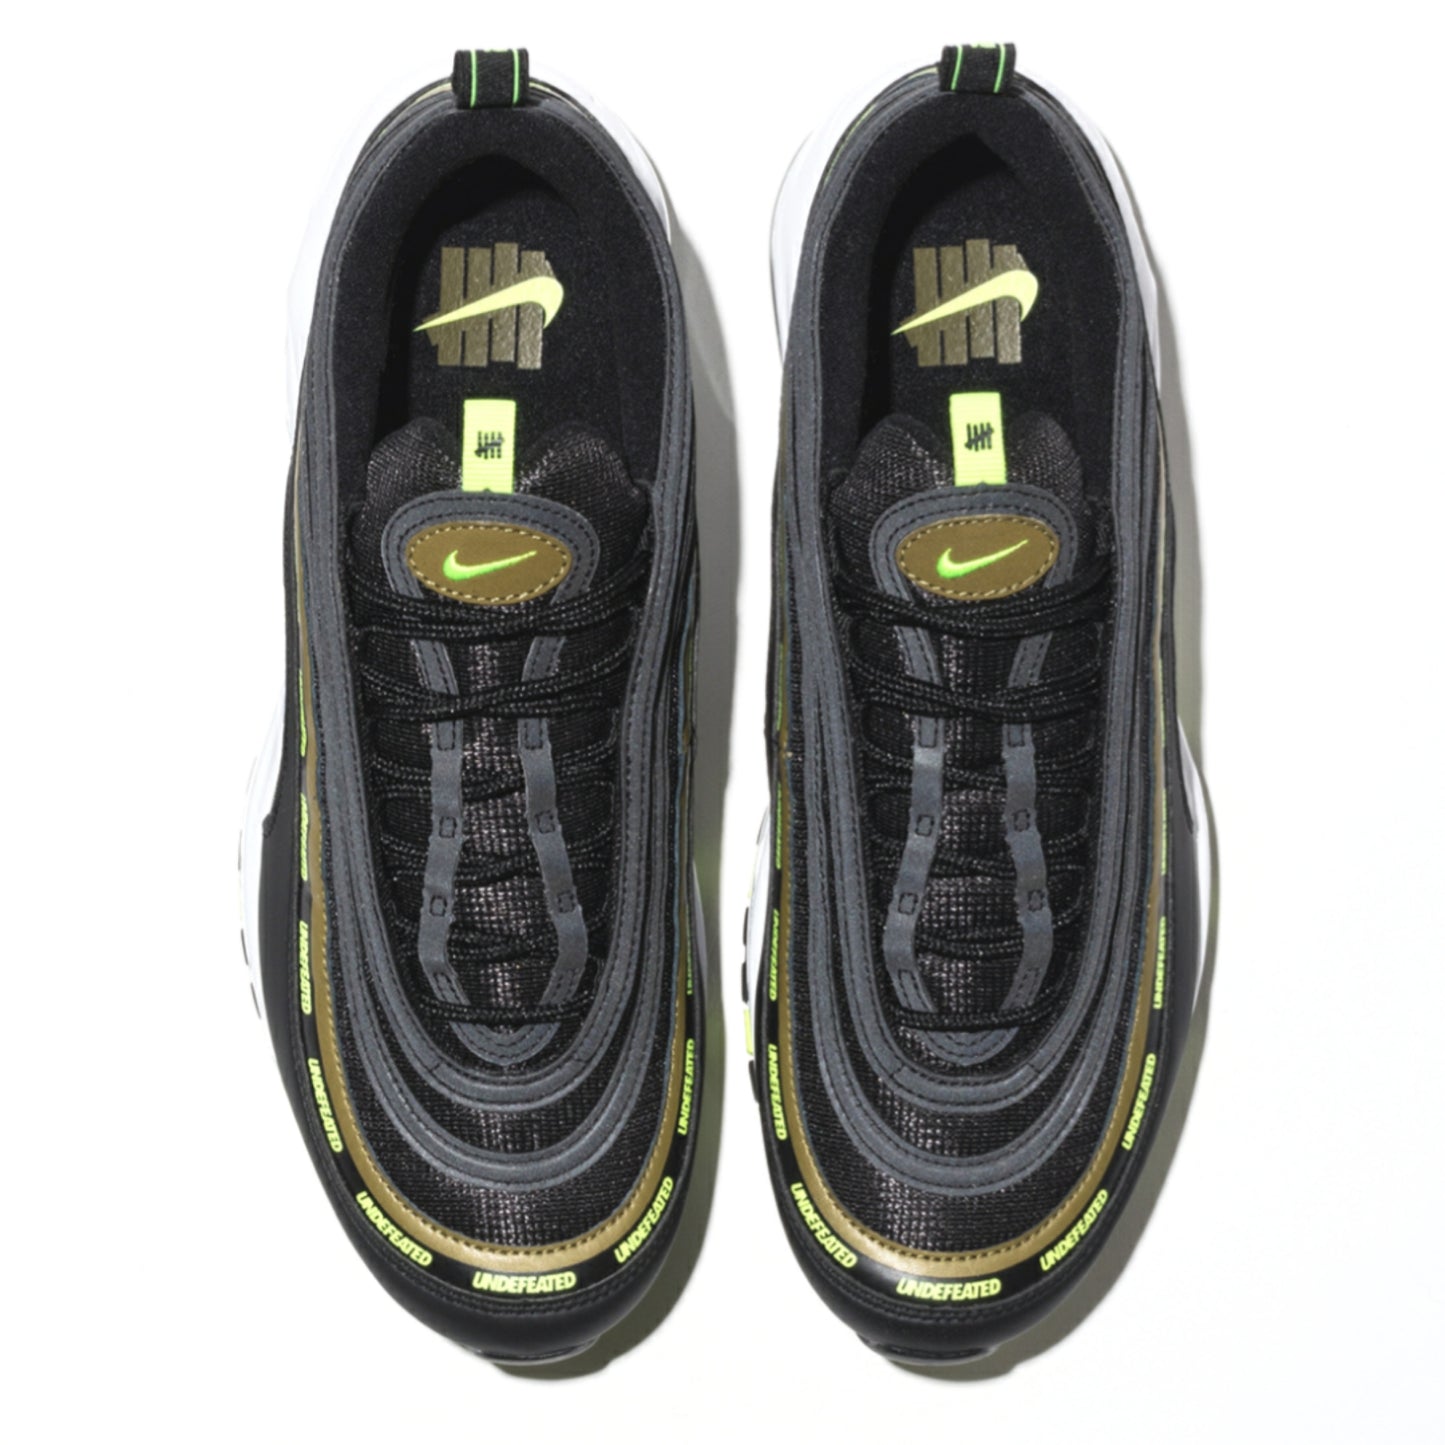 Nike x Undefeated Air Max 97 Black Volt